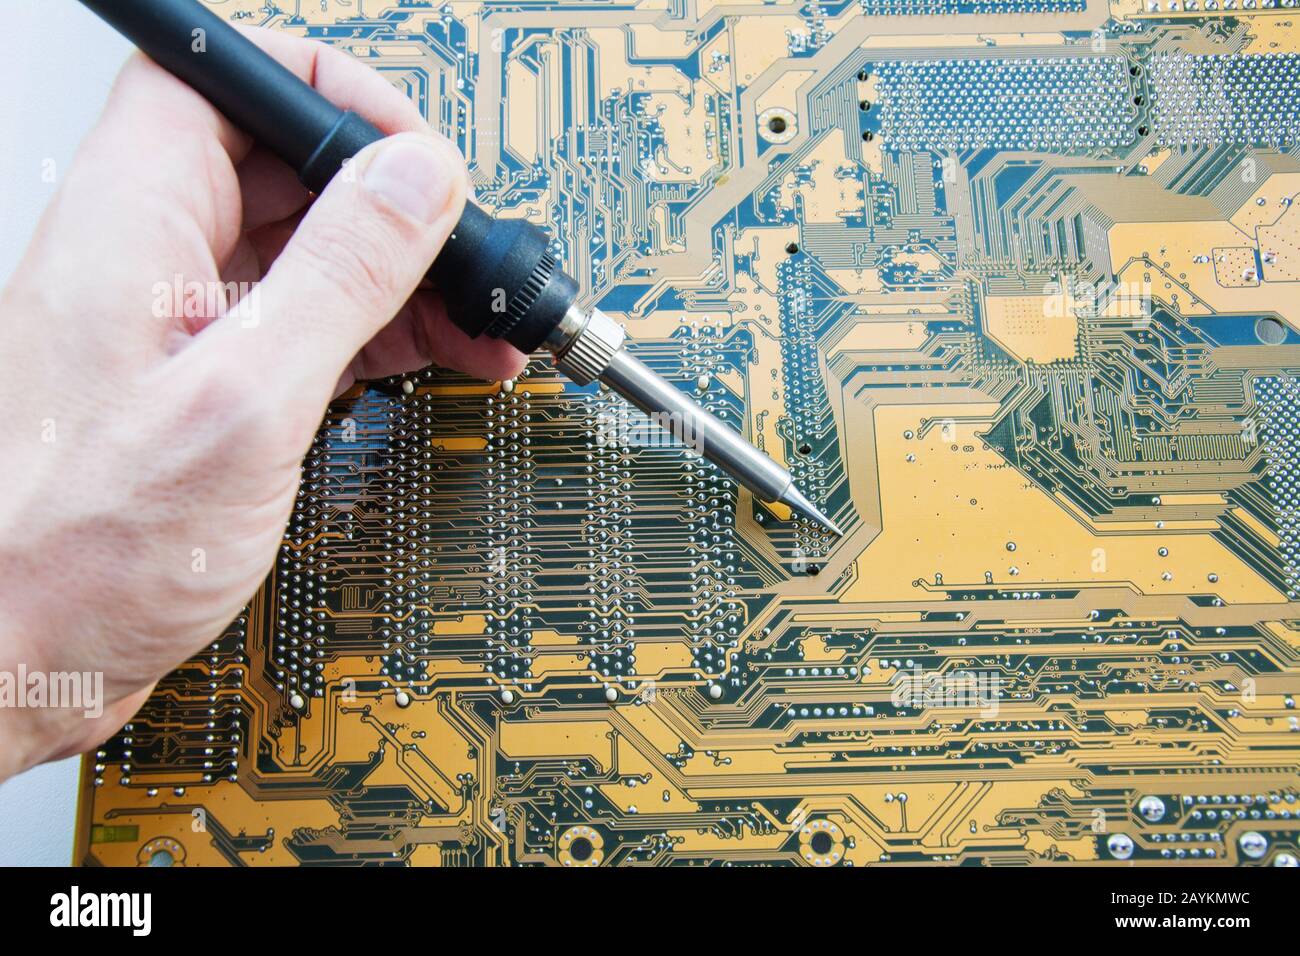 Service engineer electronics using a soldering iron performs repair of printed circuit of computer equipment. Electronics repair and tuning concept. Stock Photo